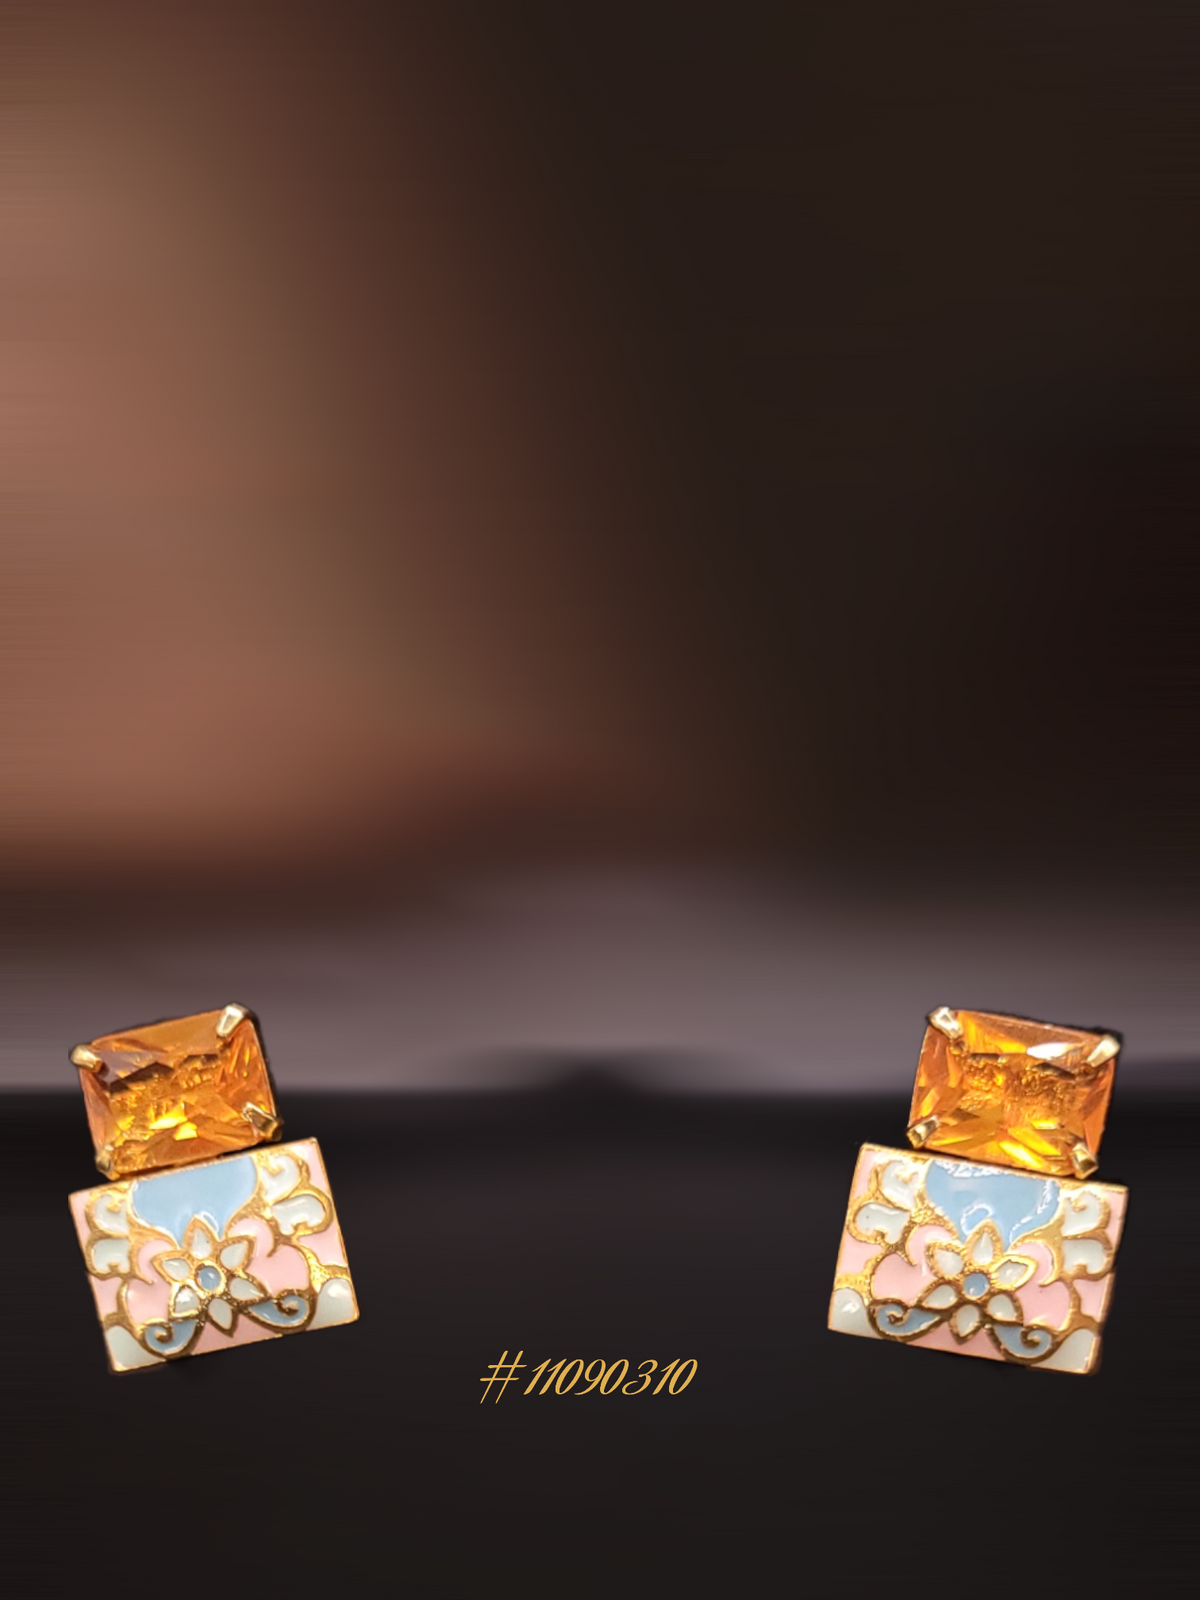 ADORABLE SQUARED DESIGN EARRINGS WITH COLORED DIAMOND & DESIGN